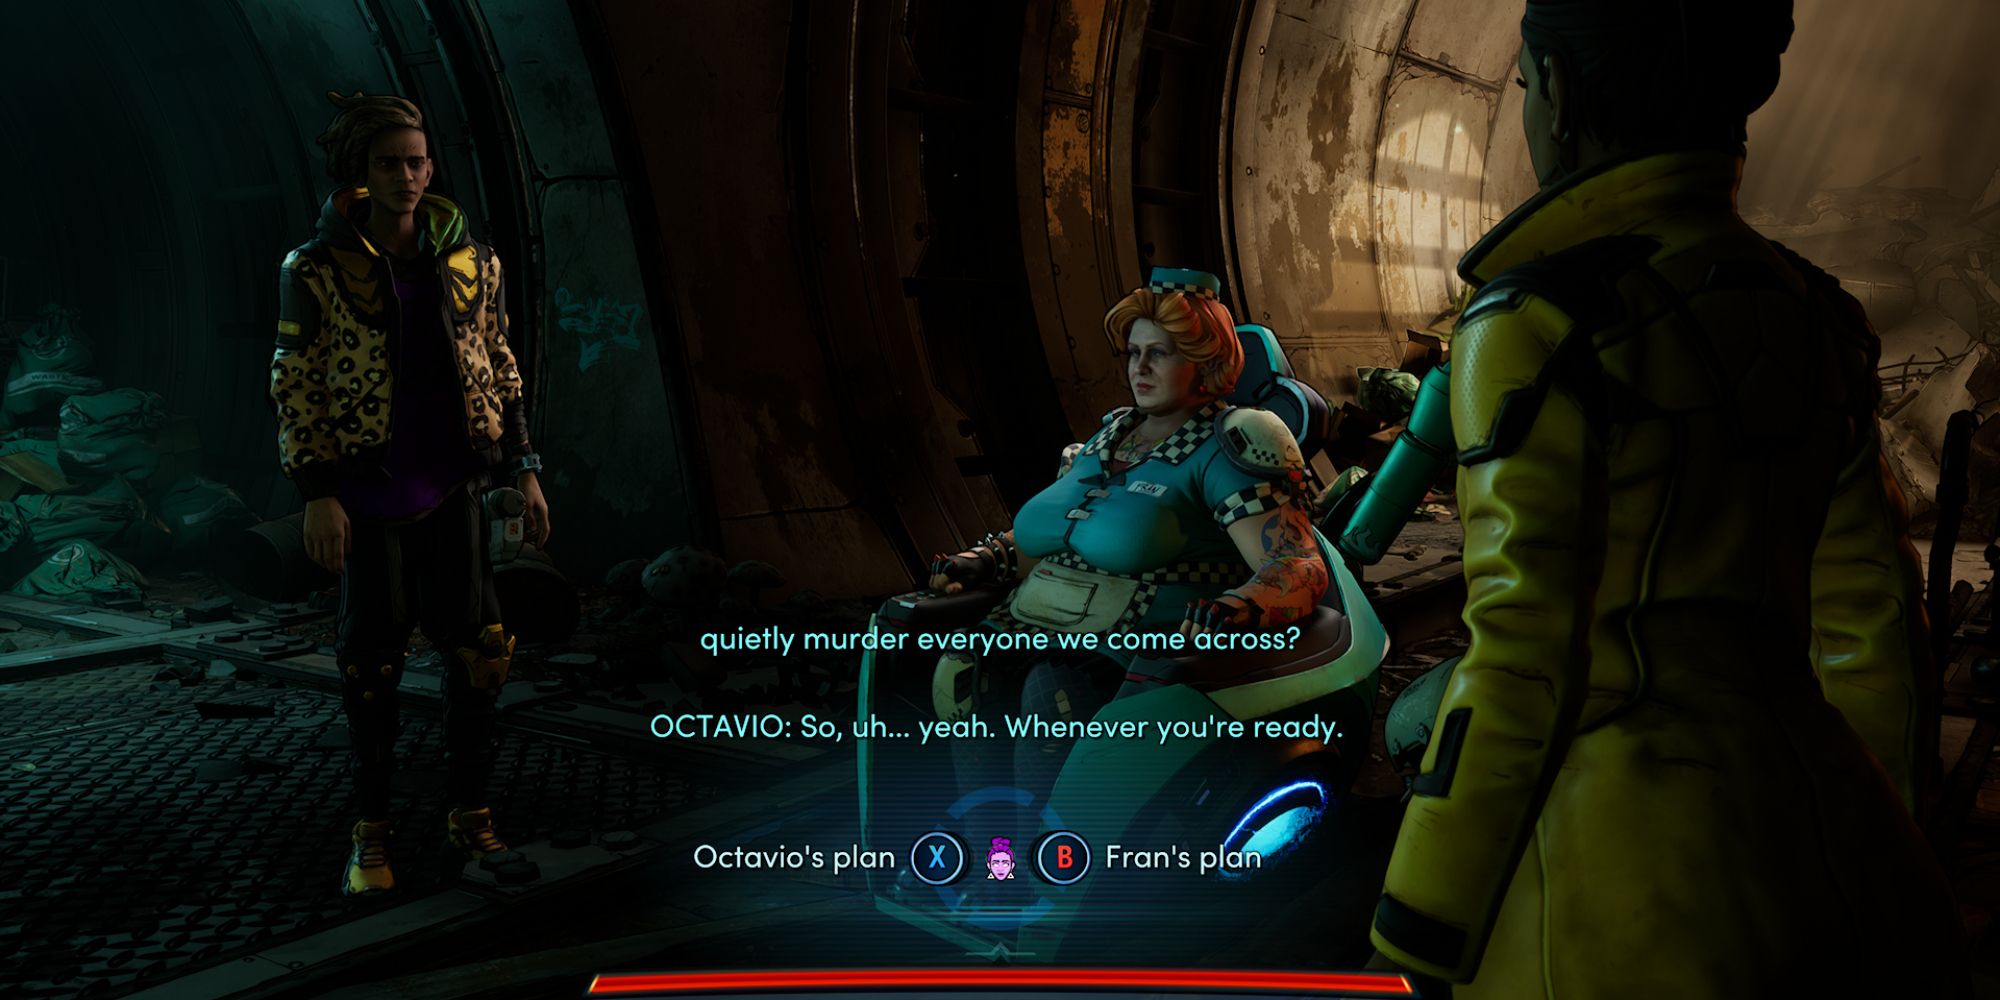 New Tales From The Borderlands Screenshot Of Octavio's Plan and Fran's Plan